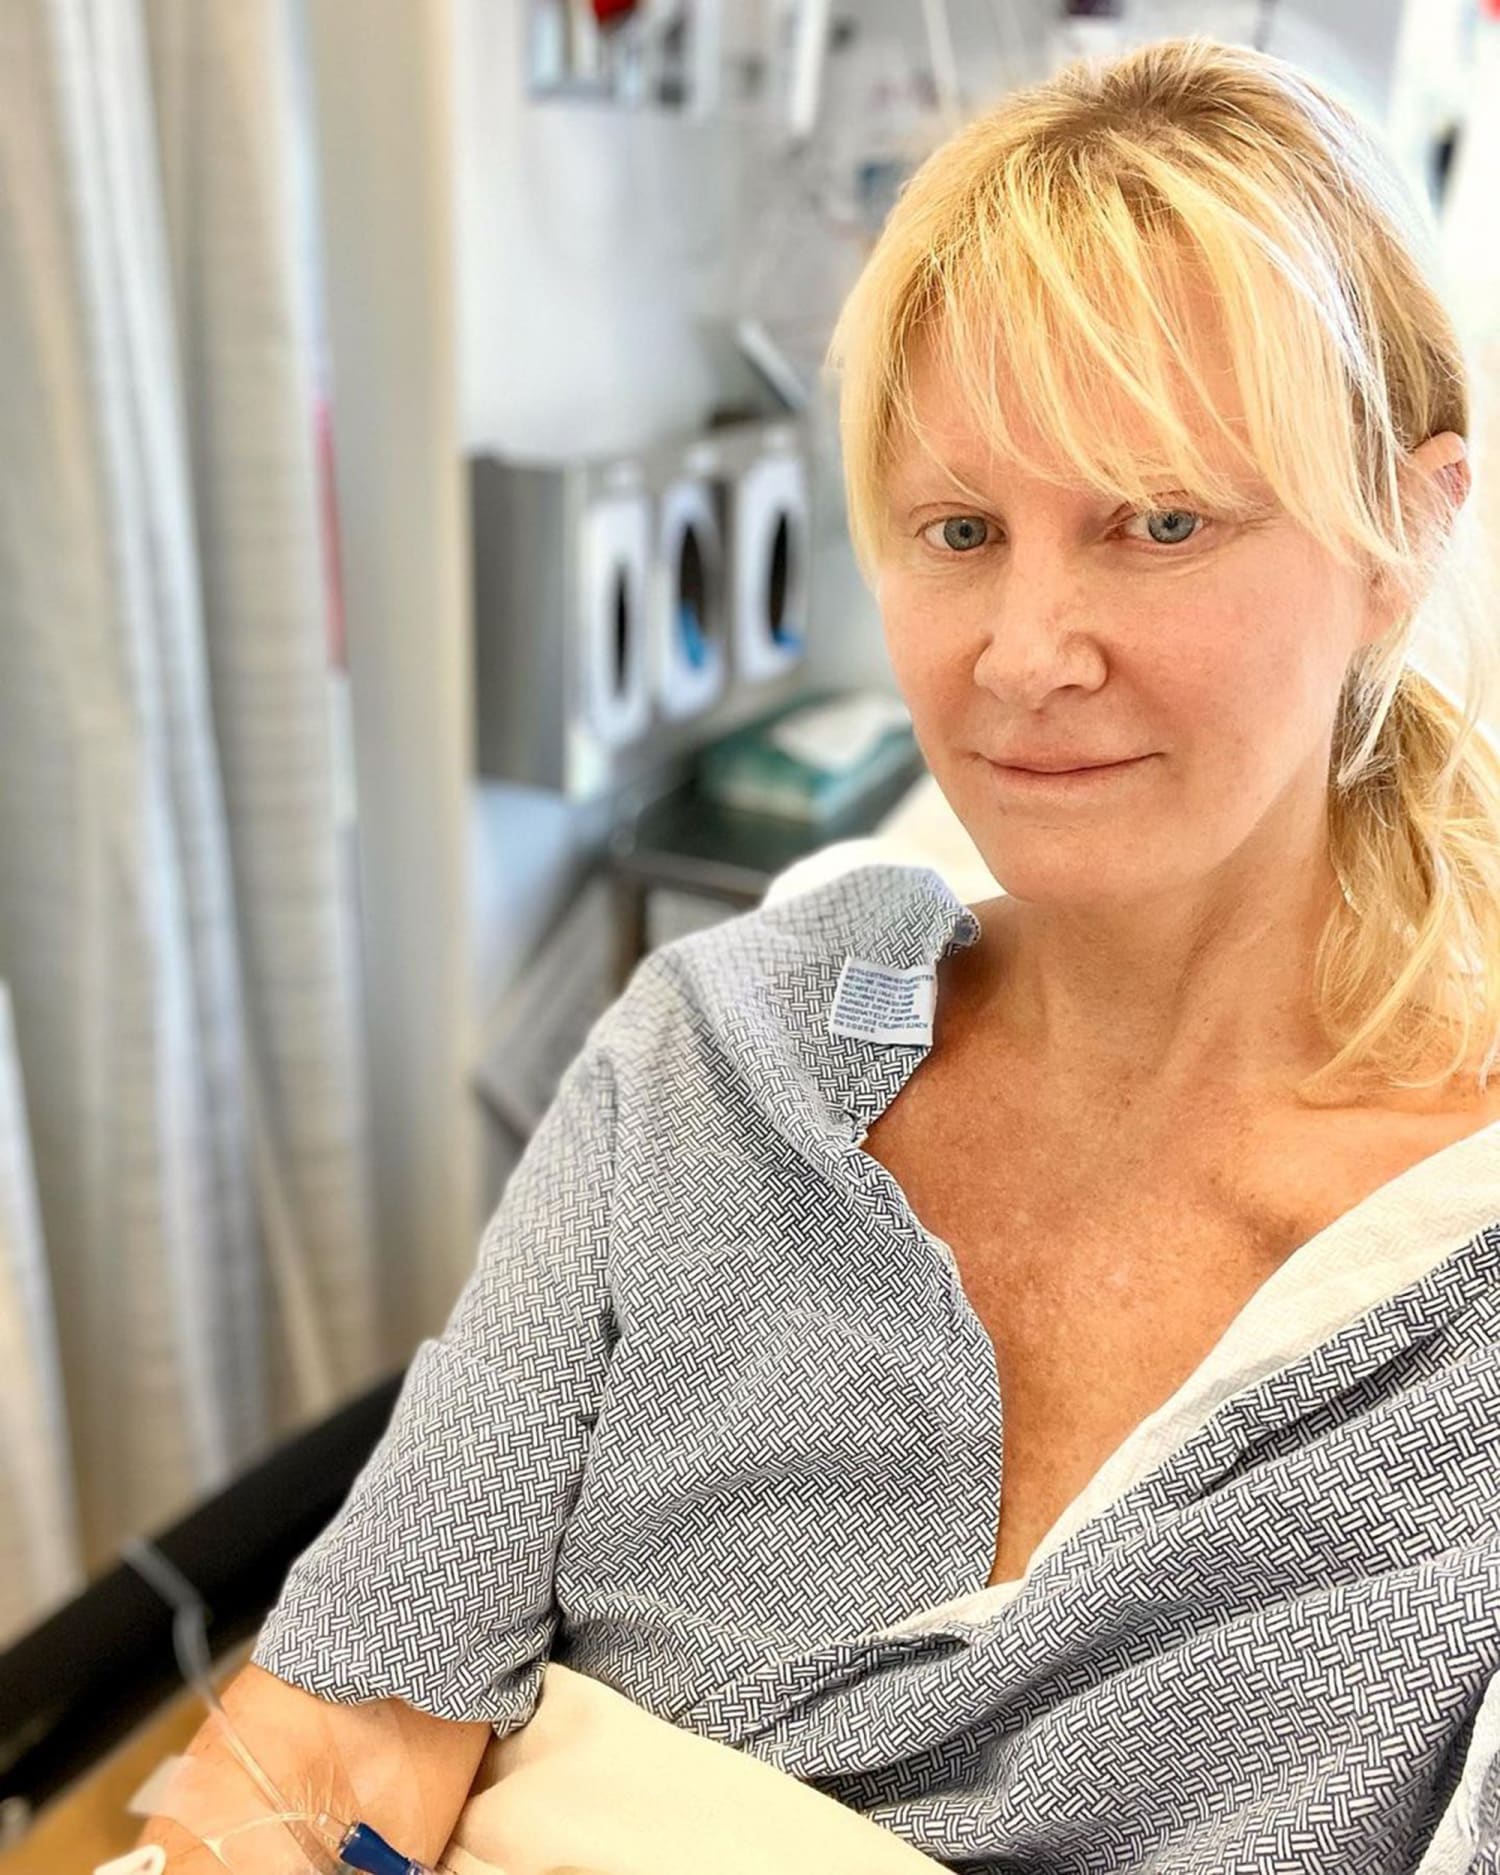 Sandra Lee shares update 3 days after hysterectomy, infection